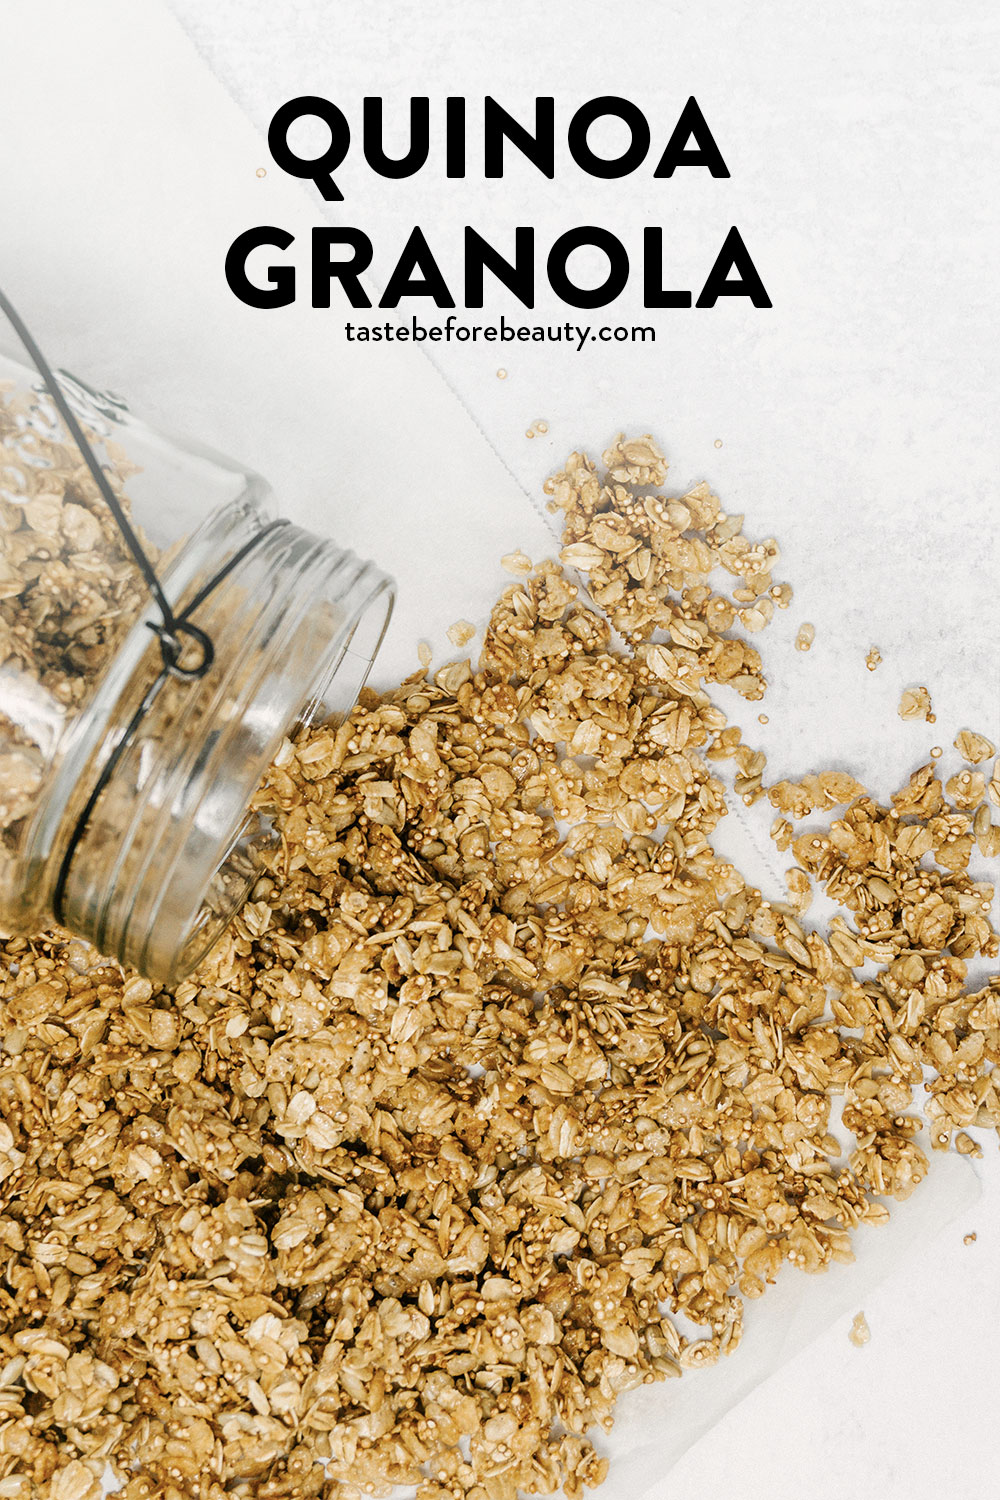 taste before beauty quinoa granola spread out on table from jar pinterest pin